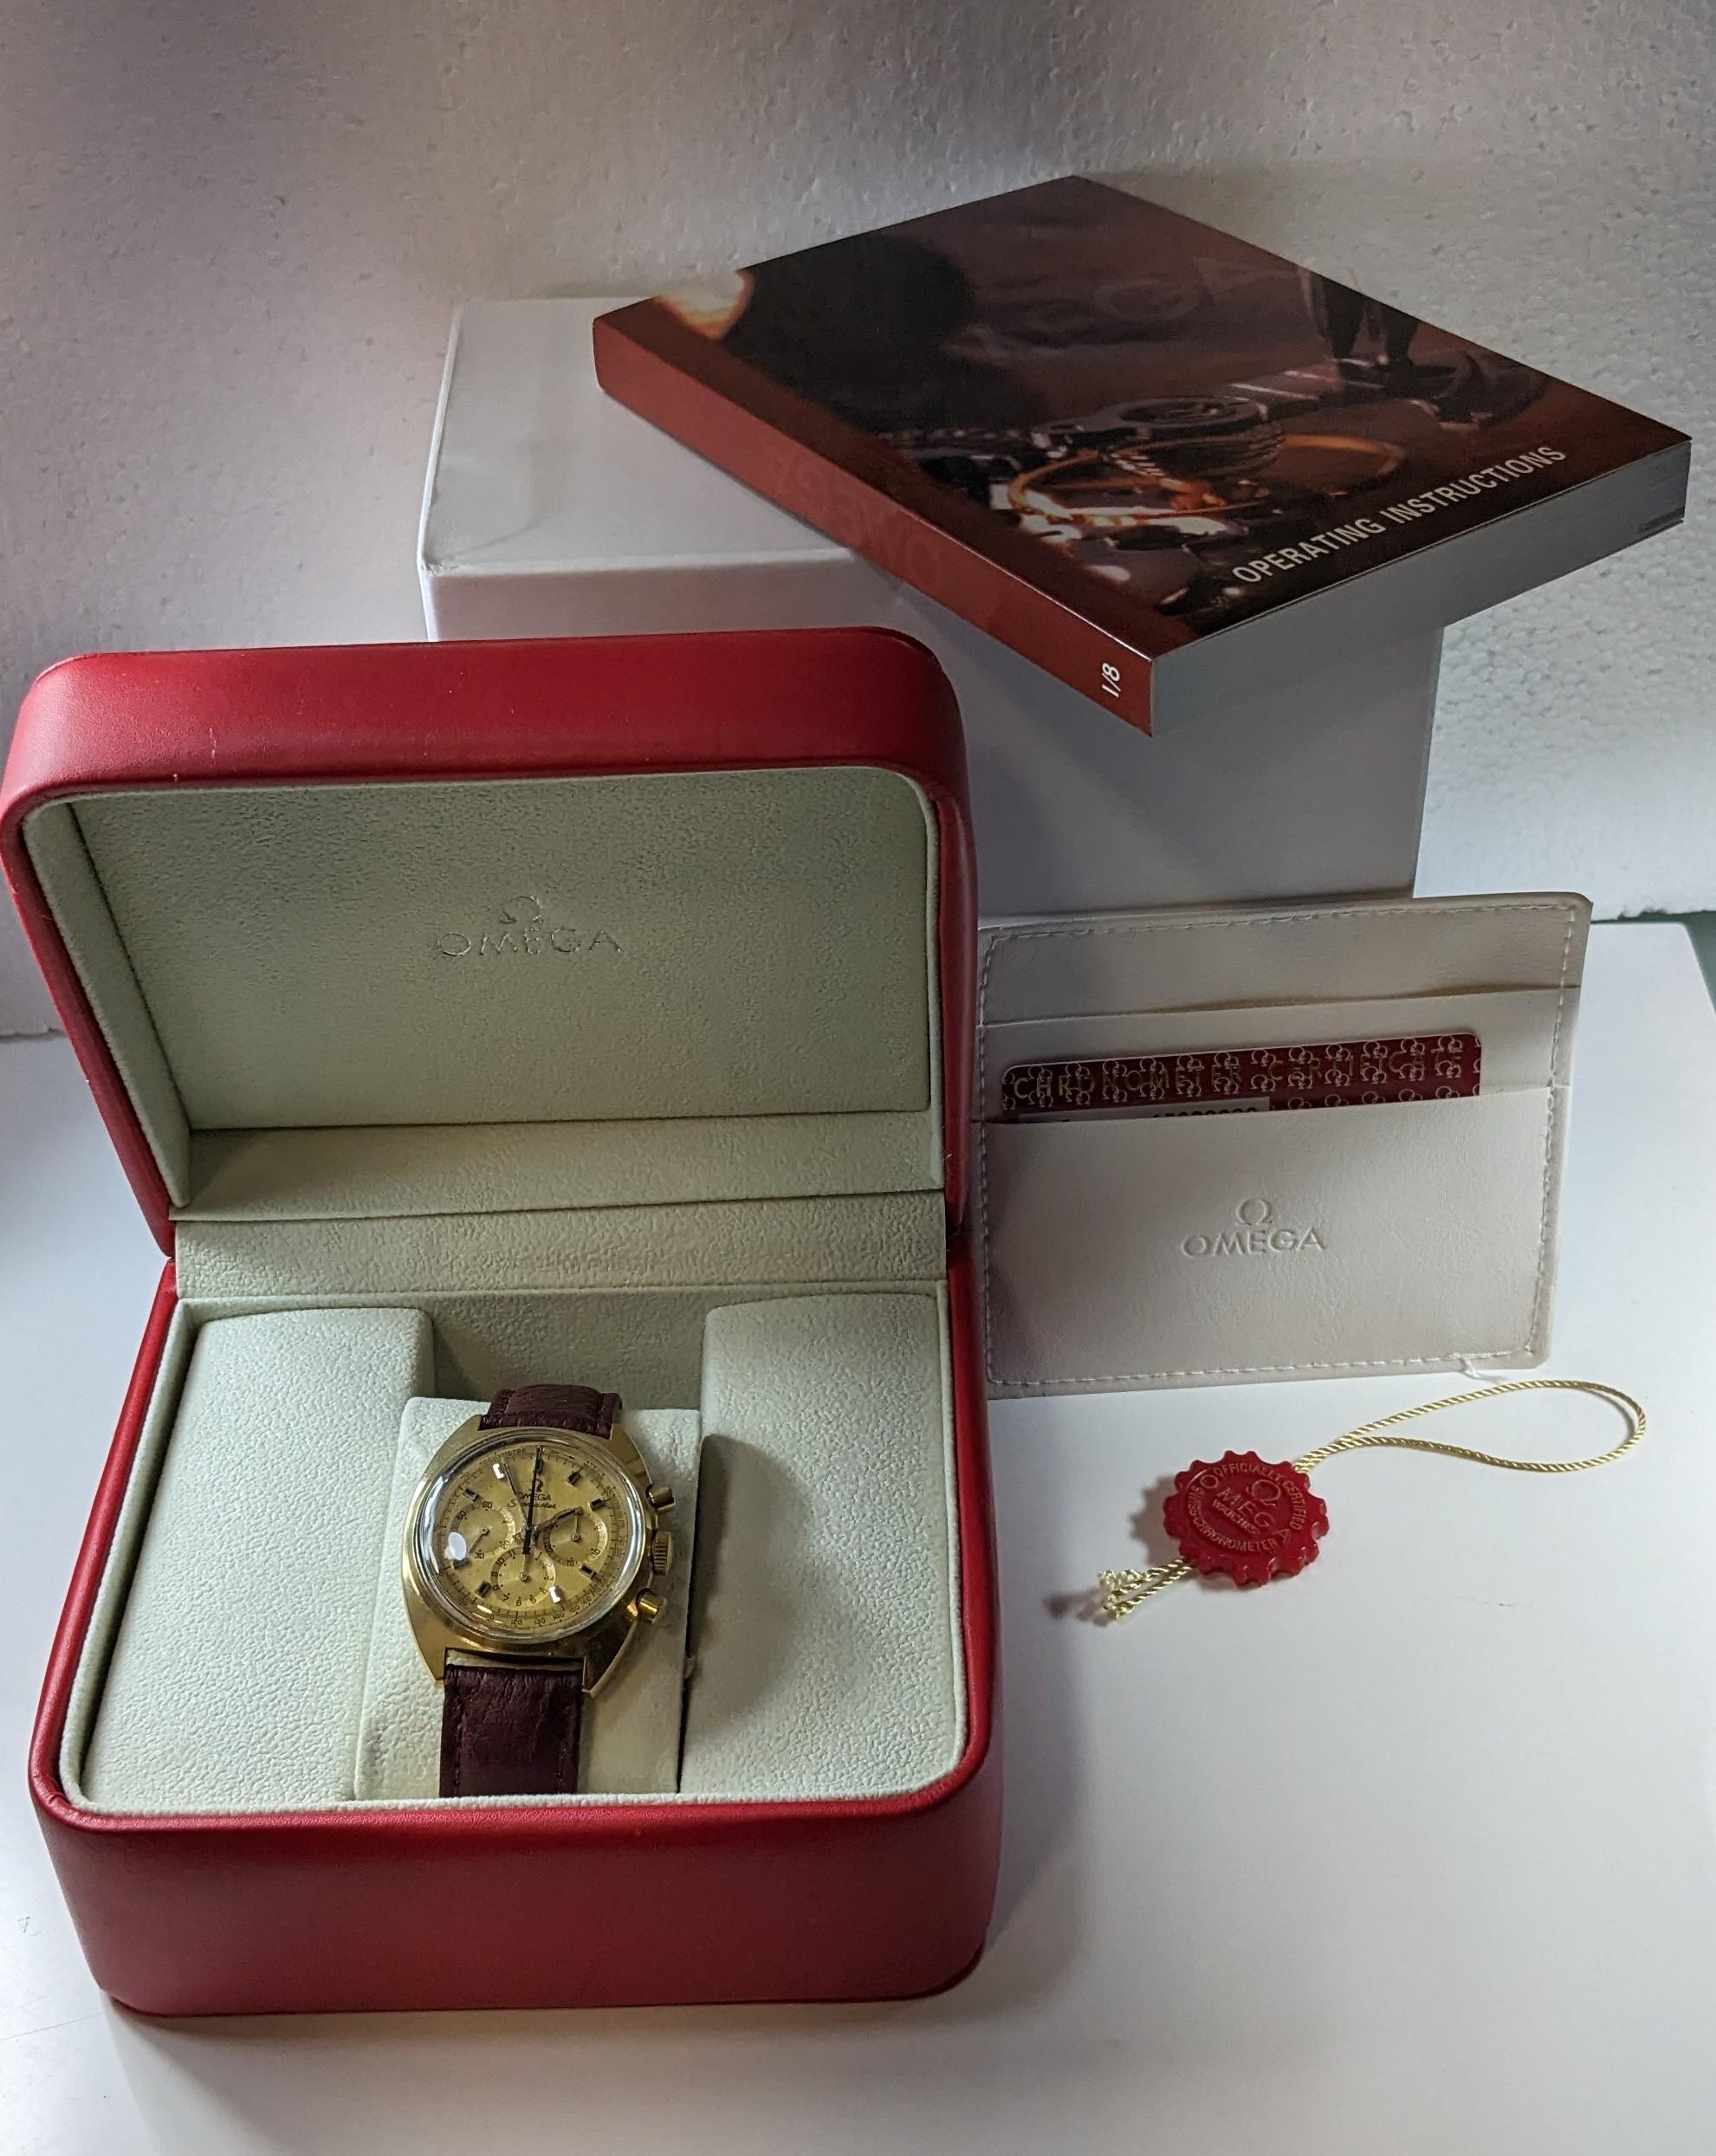 1968 Omega Saemaster Chronograph Yellow Gold Leather Strap For Sale 1